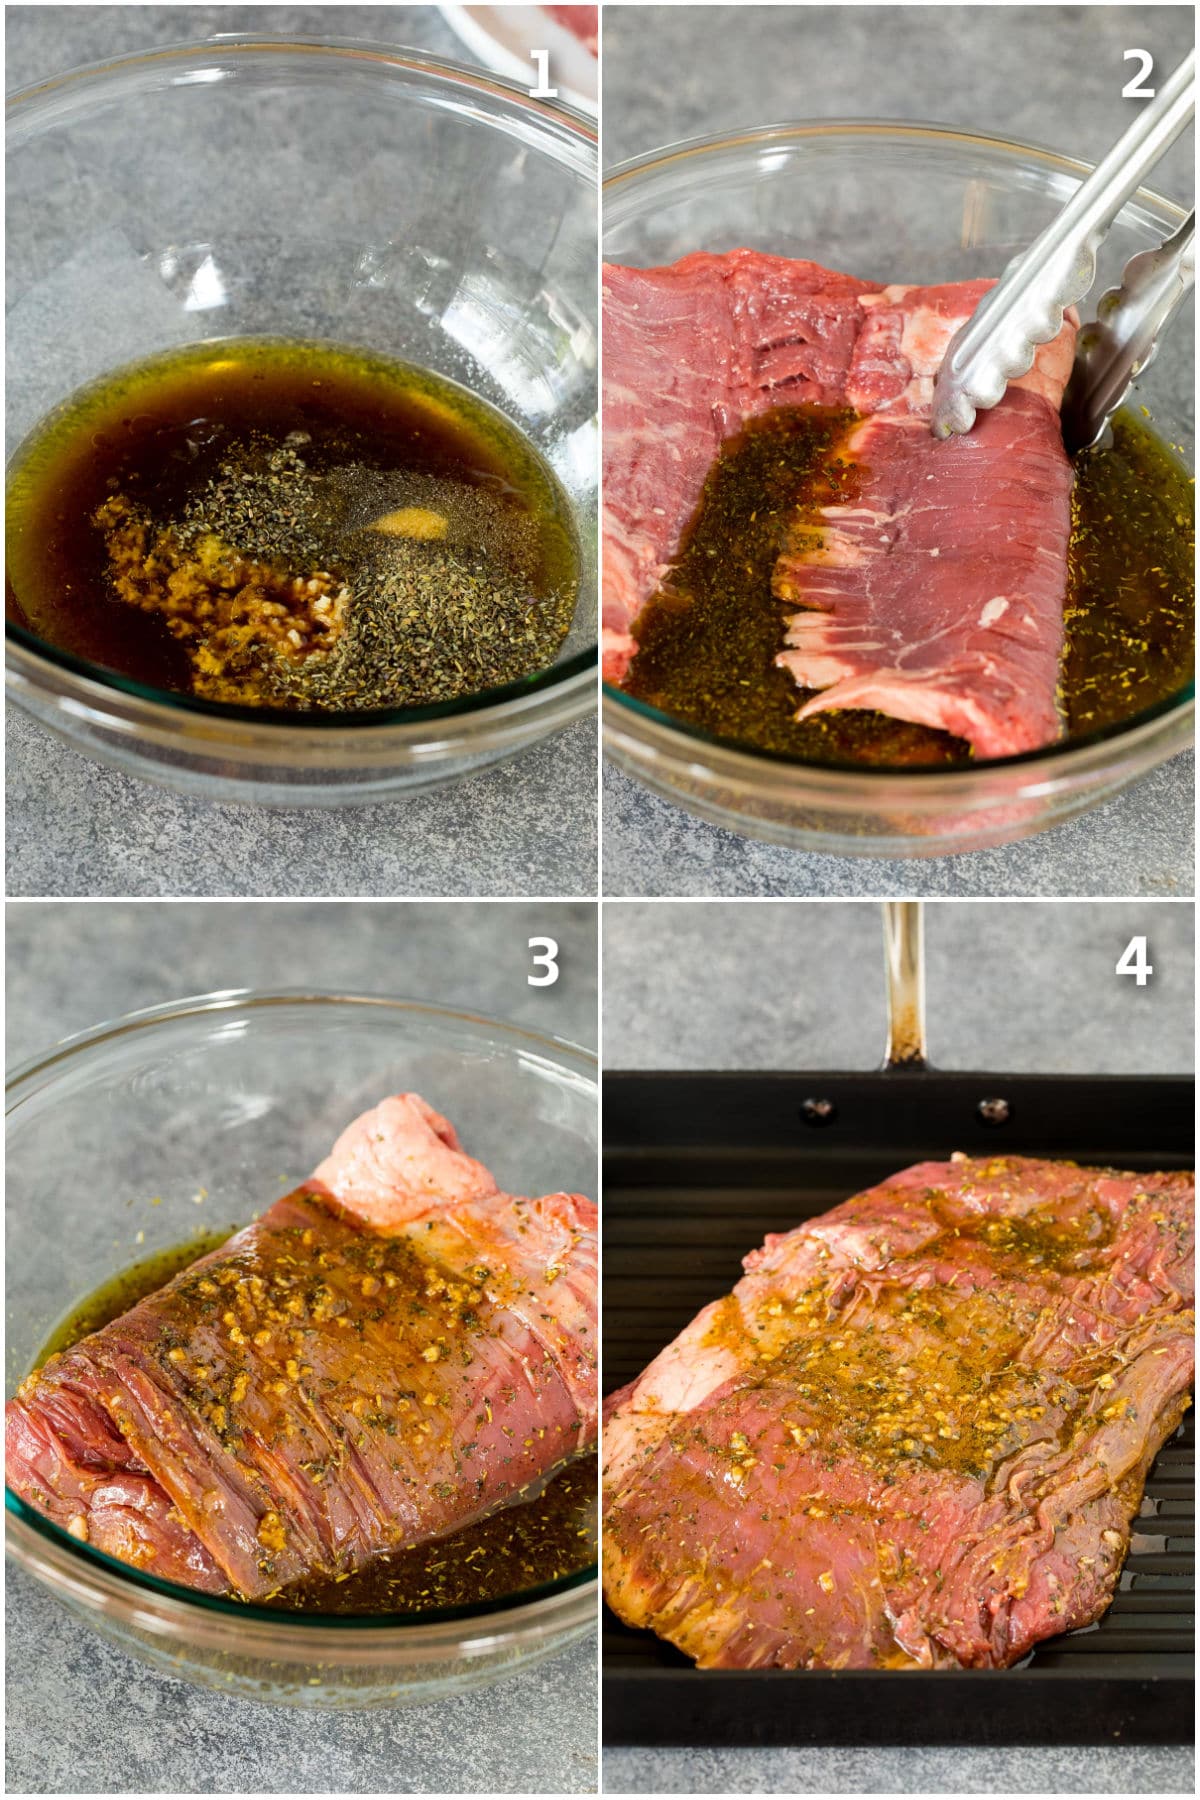 Process shots showing how to marinate and grill flank steak.